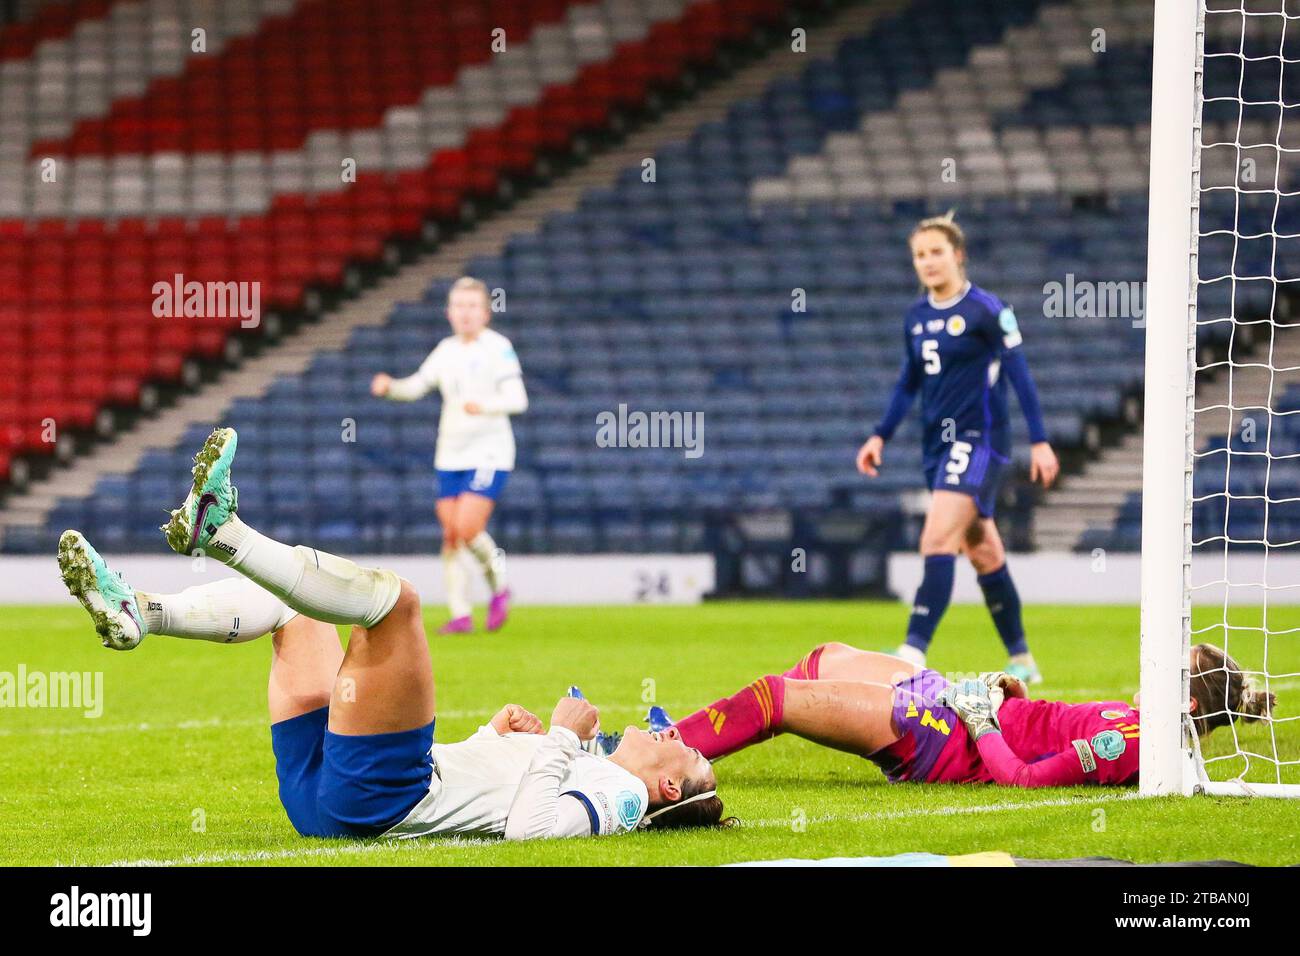 Glasgow, Scotland, UK. 05 Dec 23. Glasgow, UK. Scotland played against England in the UEFA Women's League, at Hampden Park, Glasgow, Scotland, UK. This is the final game for both teams in the UEFA Women's Nations League campaign, Credit: Findlay/Alamy Live News Stock Photo